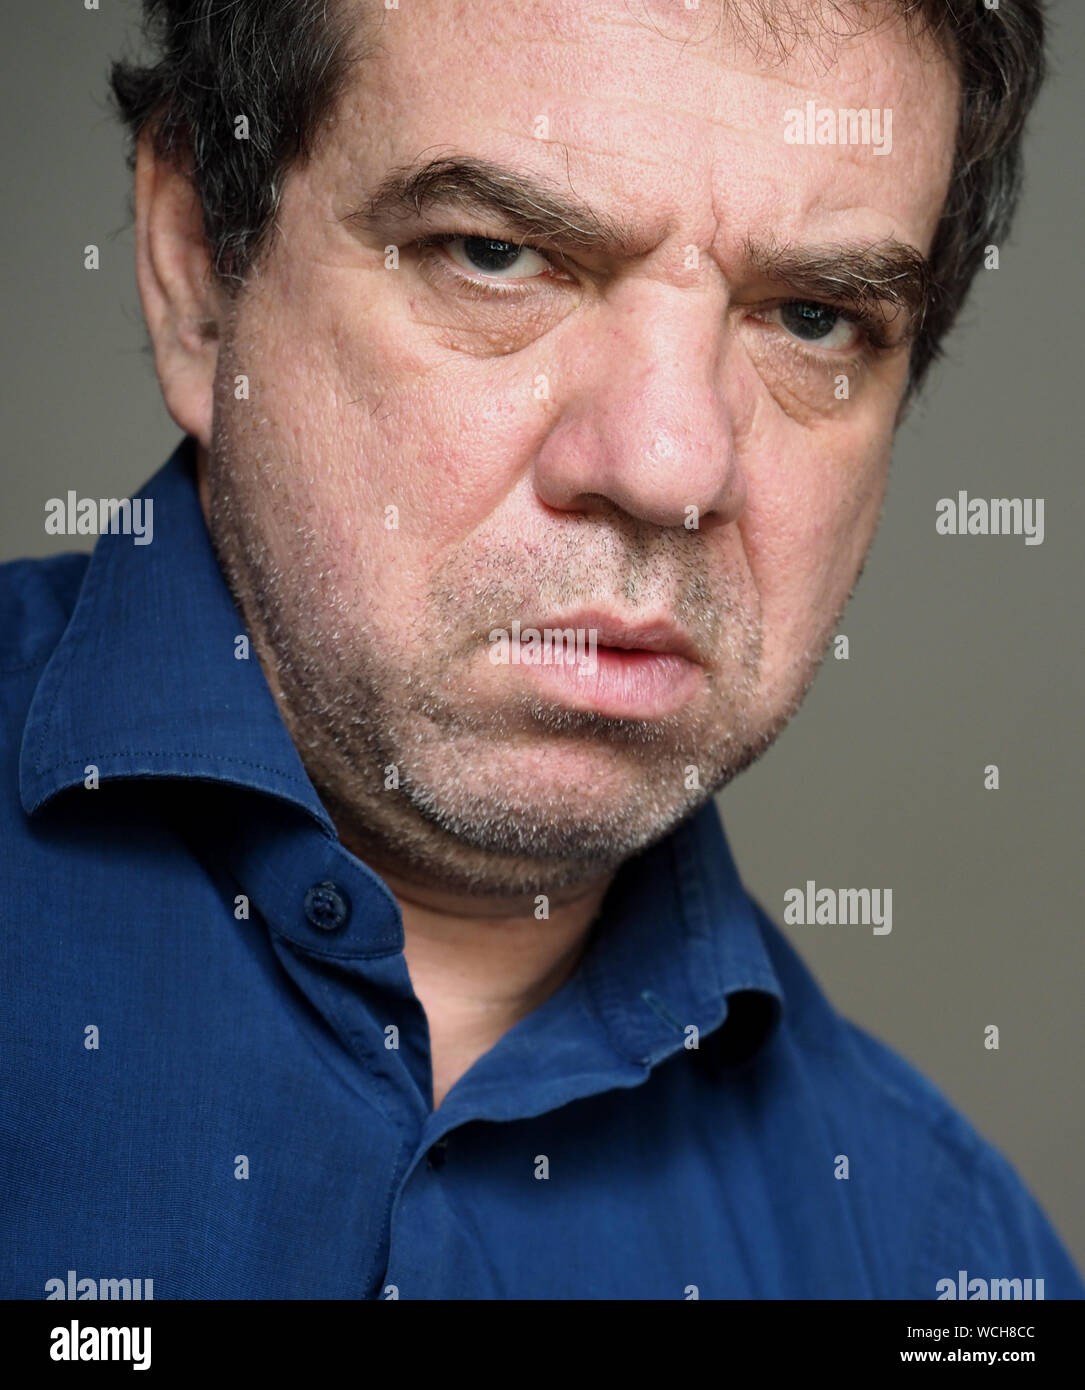 Close-up Portrait Of Angry Man Stock Photo